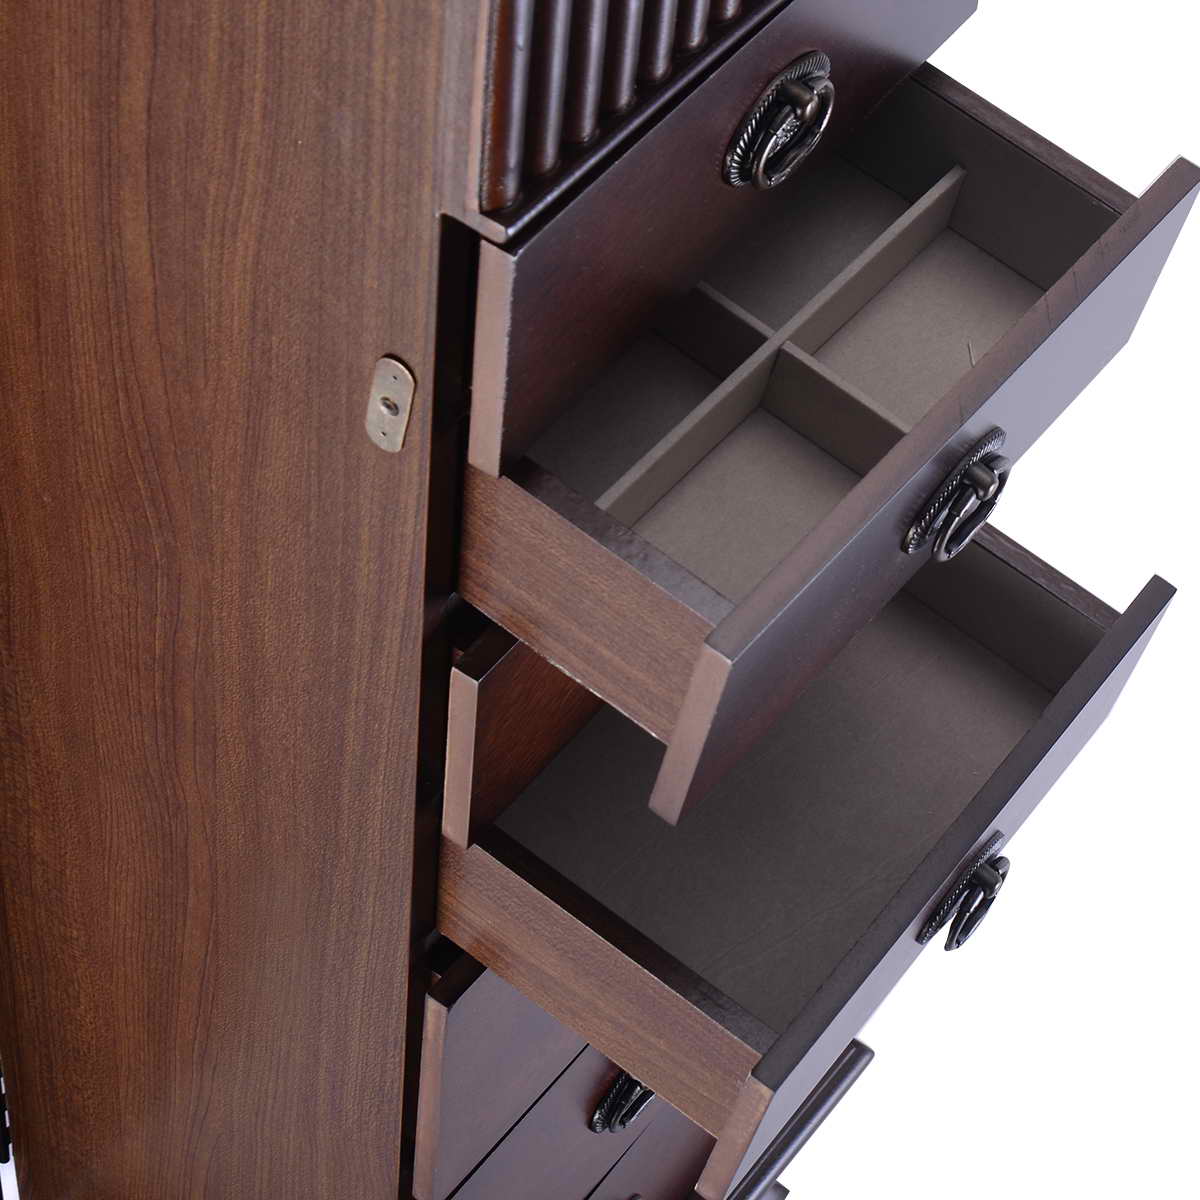 Topbuy Jewelry Cabinet Armoire Cambered Front Storage Chest Stand Organizer